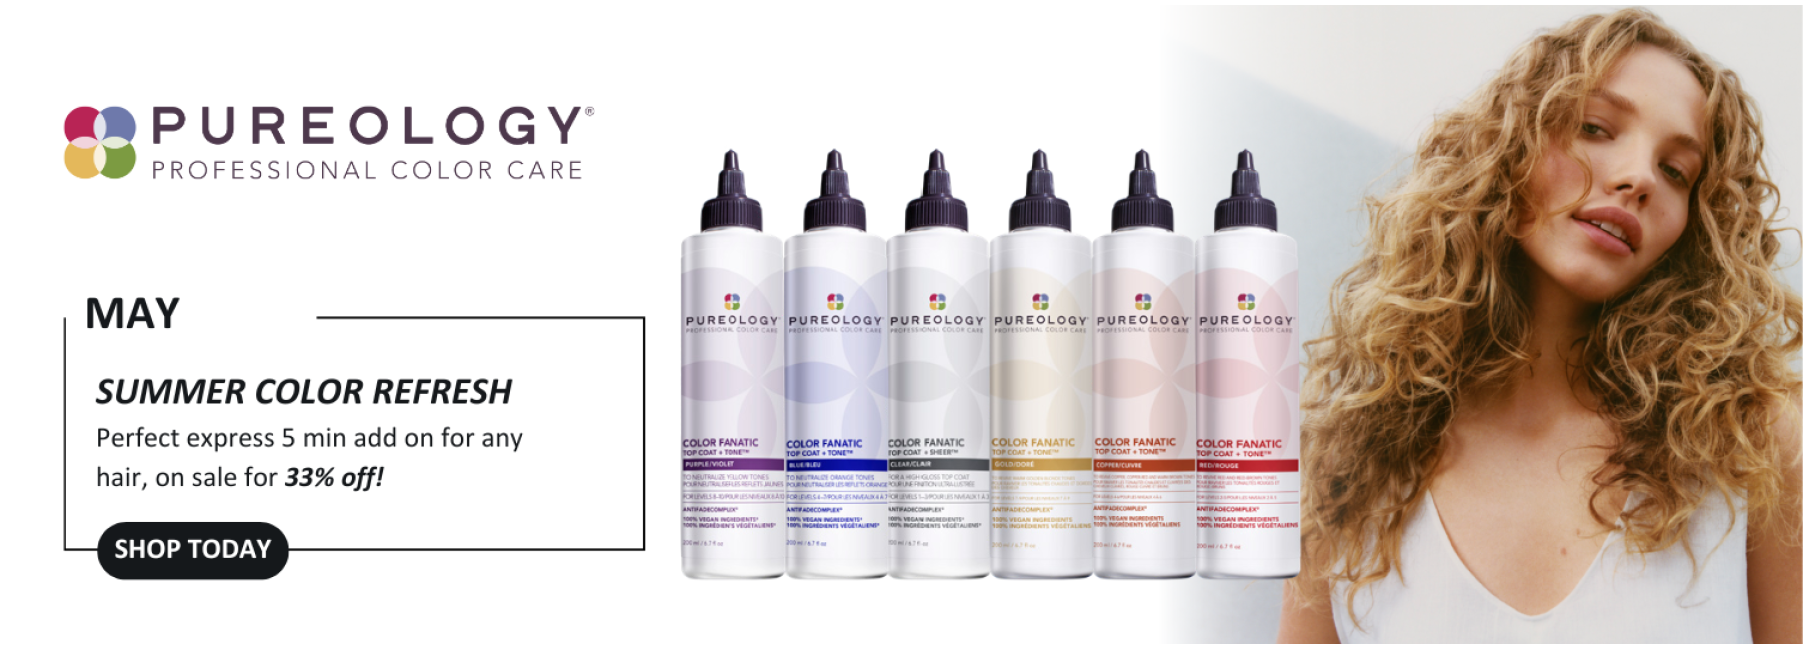 PUREOLOGY COLOR FANATIC MAY OFFER